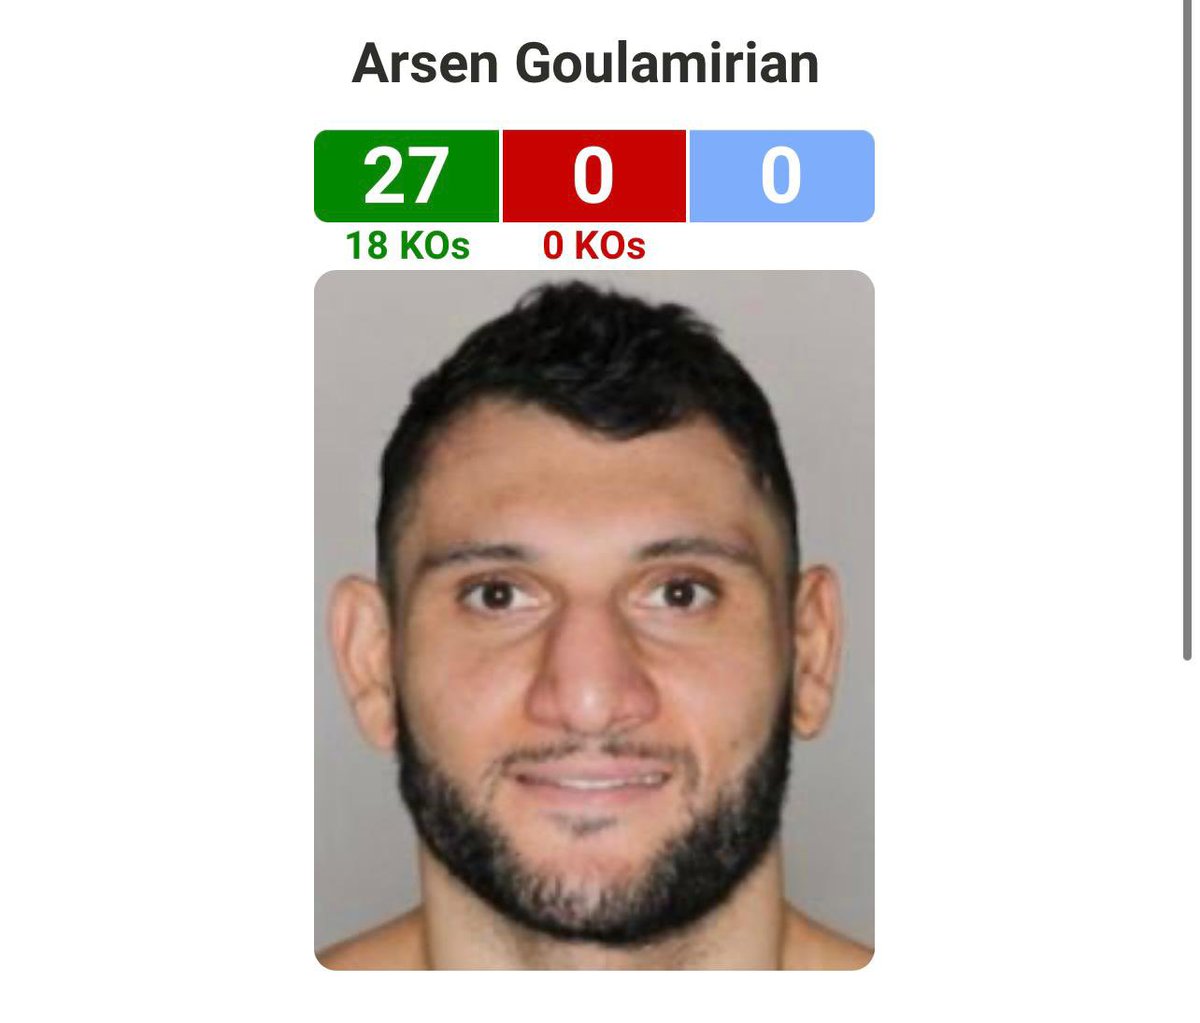 Yo @arsen_feroz I want to fight, stop ducking me, let’s make a fight happen, you’ve had that belt since 2018 and fought nothing but bums. I’ll come to Paris or Armenia, whatever you want. Let’s fight, no more ducking